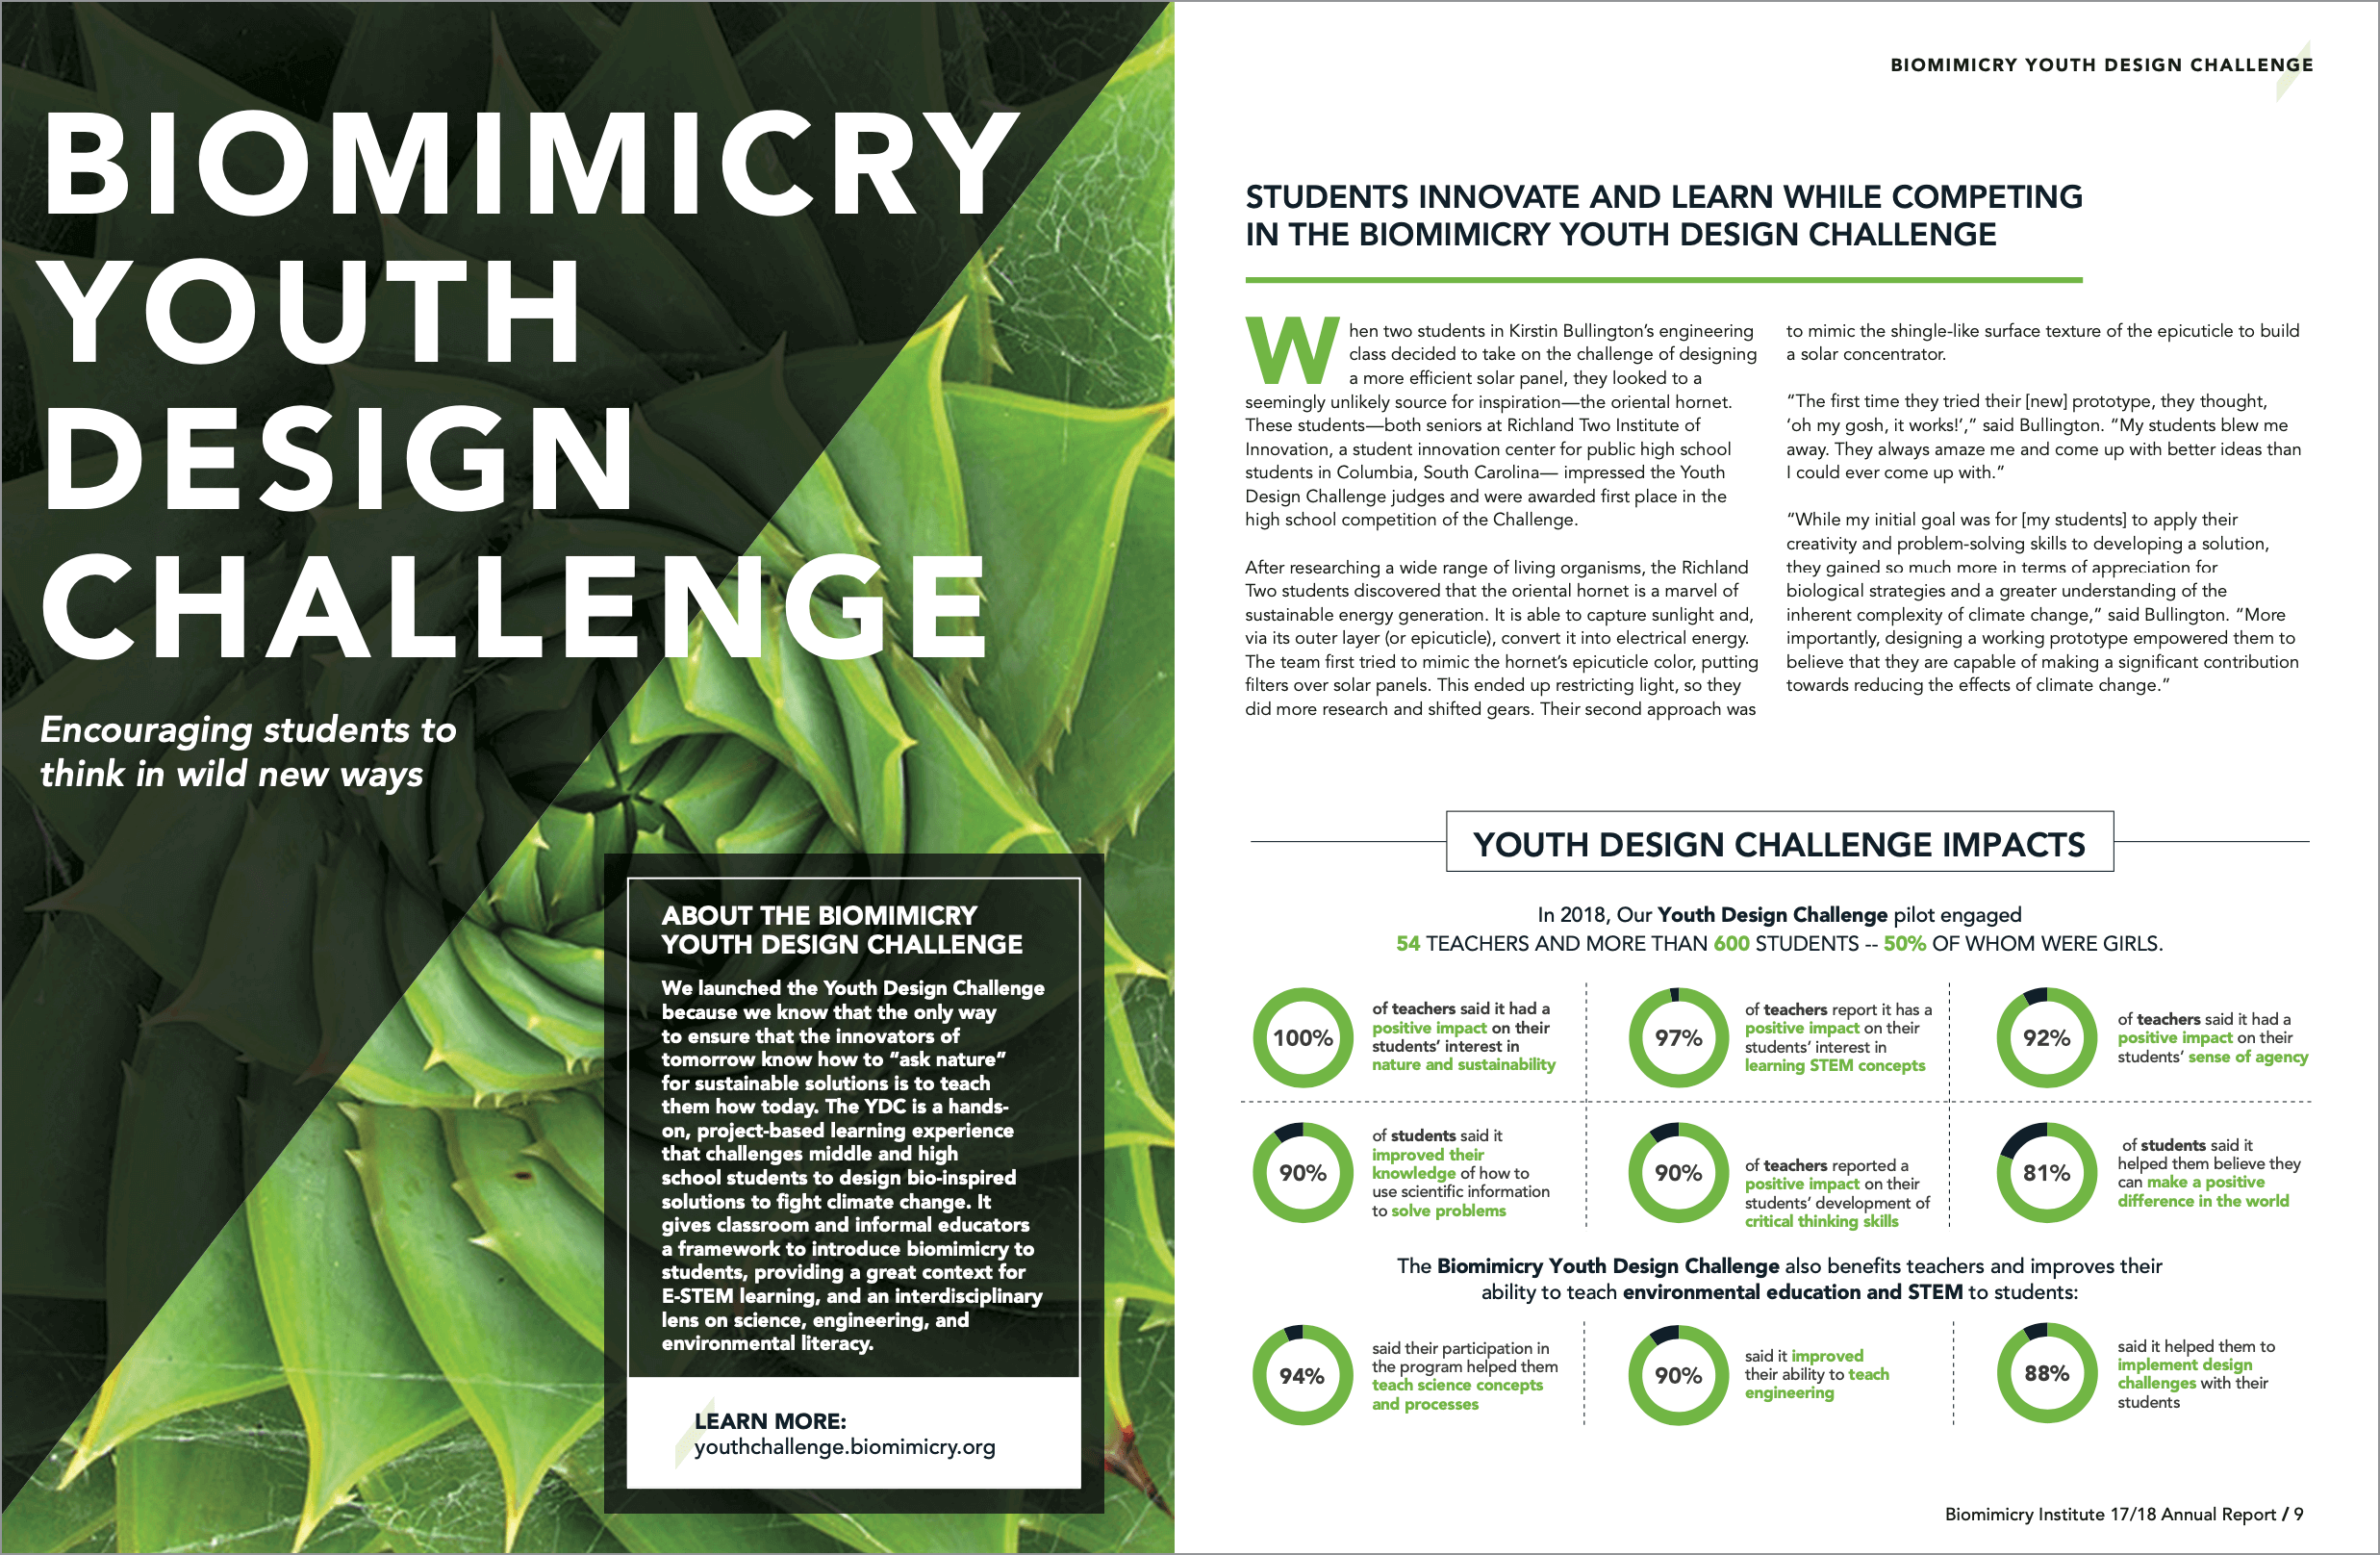 Two-page spread with "Biomimicry Youth Design Challenge" on left page over background photo of a leaf. On the right page, a story and infographic about a student biomimicry project.